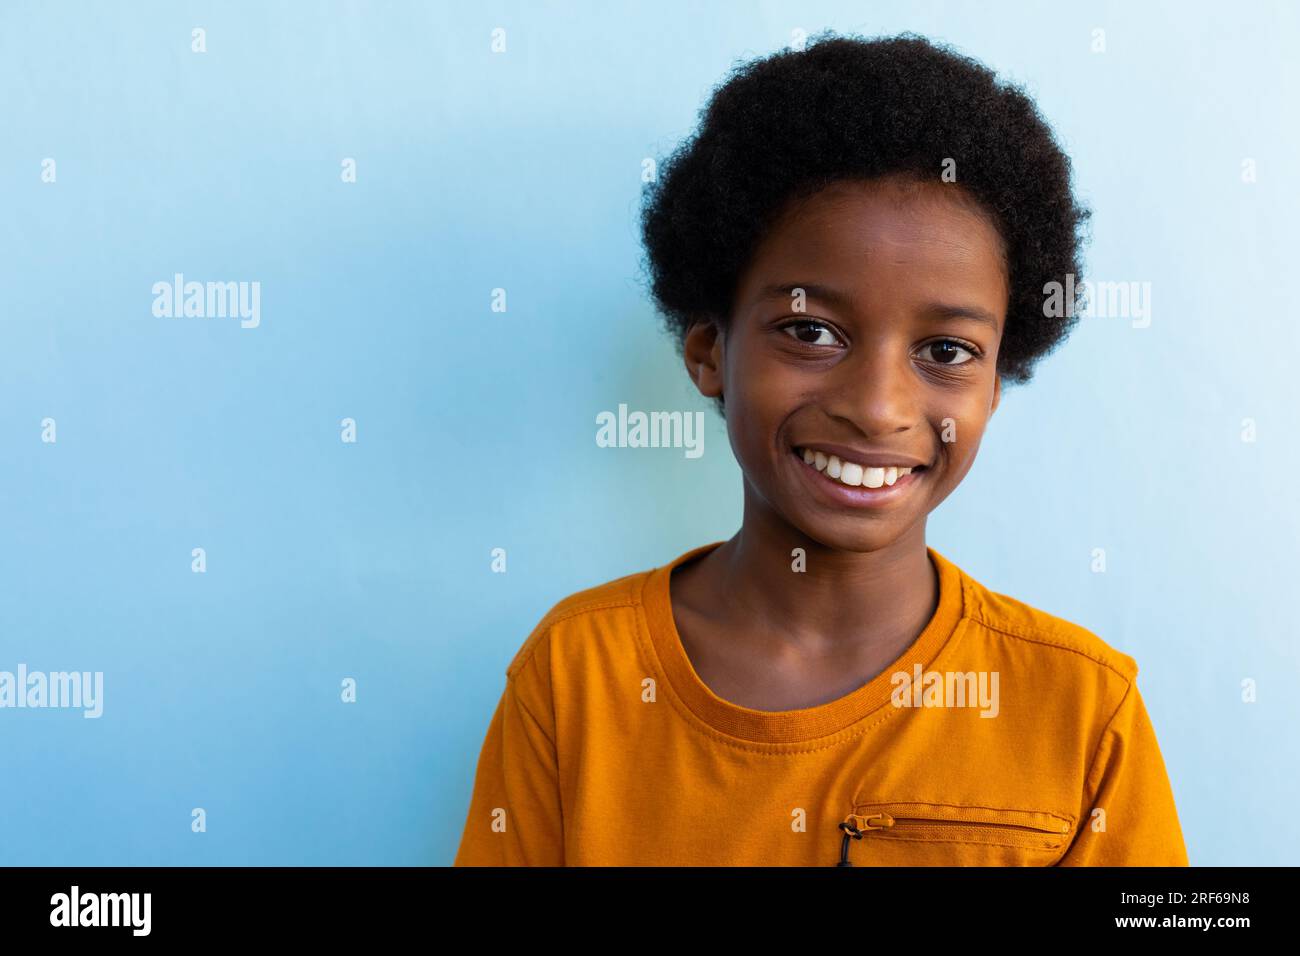 Portrait of happy biracial schoolboy wearing yellow tshirt over blue background, copy space Stock Photo